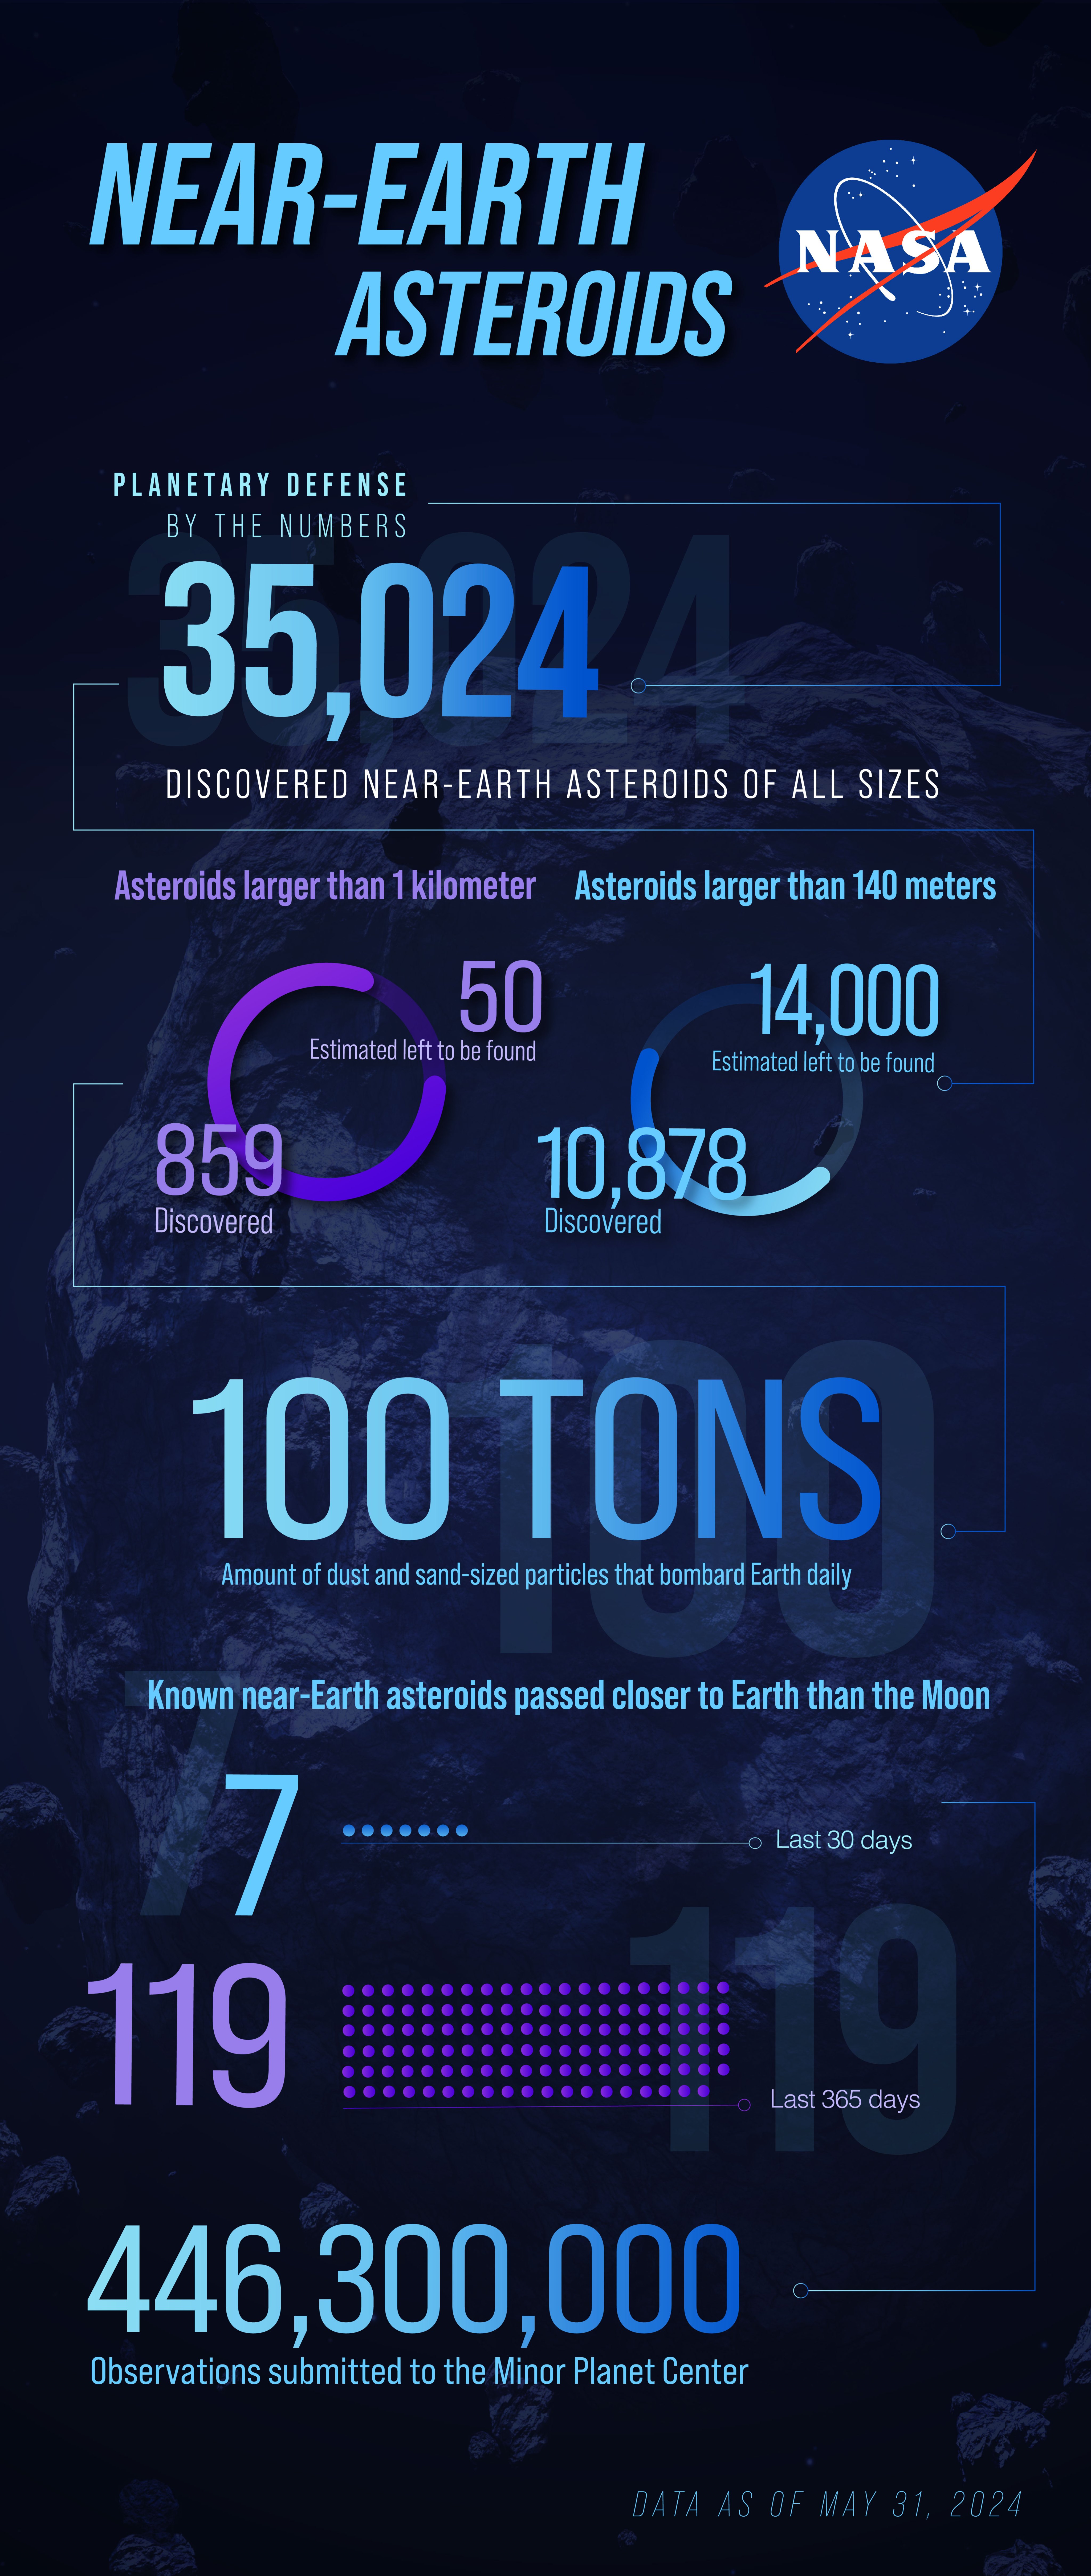 Infographic for Planetary Defense by the numbers. The title reads Near-Earth Asteroids next to the NASA logo. 35,024 discovered near-earth asteroids of all sizes. 859 discovered and 50 estimated left to be found asteroids larger than 1 km. 10,878 discovered and 15,000 estimated left to be found asteroids larger than 140 meters. 100 Tons: Amount of dust and sand-sized particles that bombard Earth daily. 7 known near-Earth asteroids passed closer to Earth than the moon in the last 30 days, 119 in the last 365 days and 446,300,000 observations submitted to the Minor Planet Center.